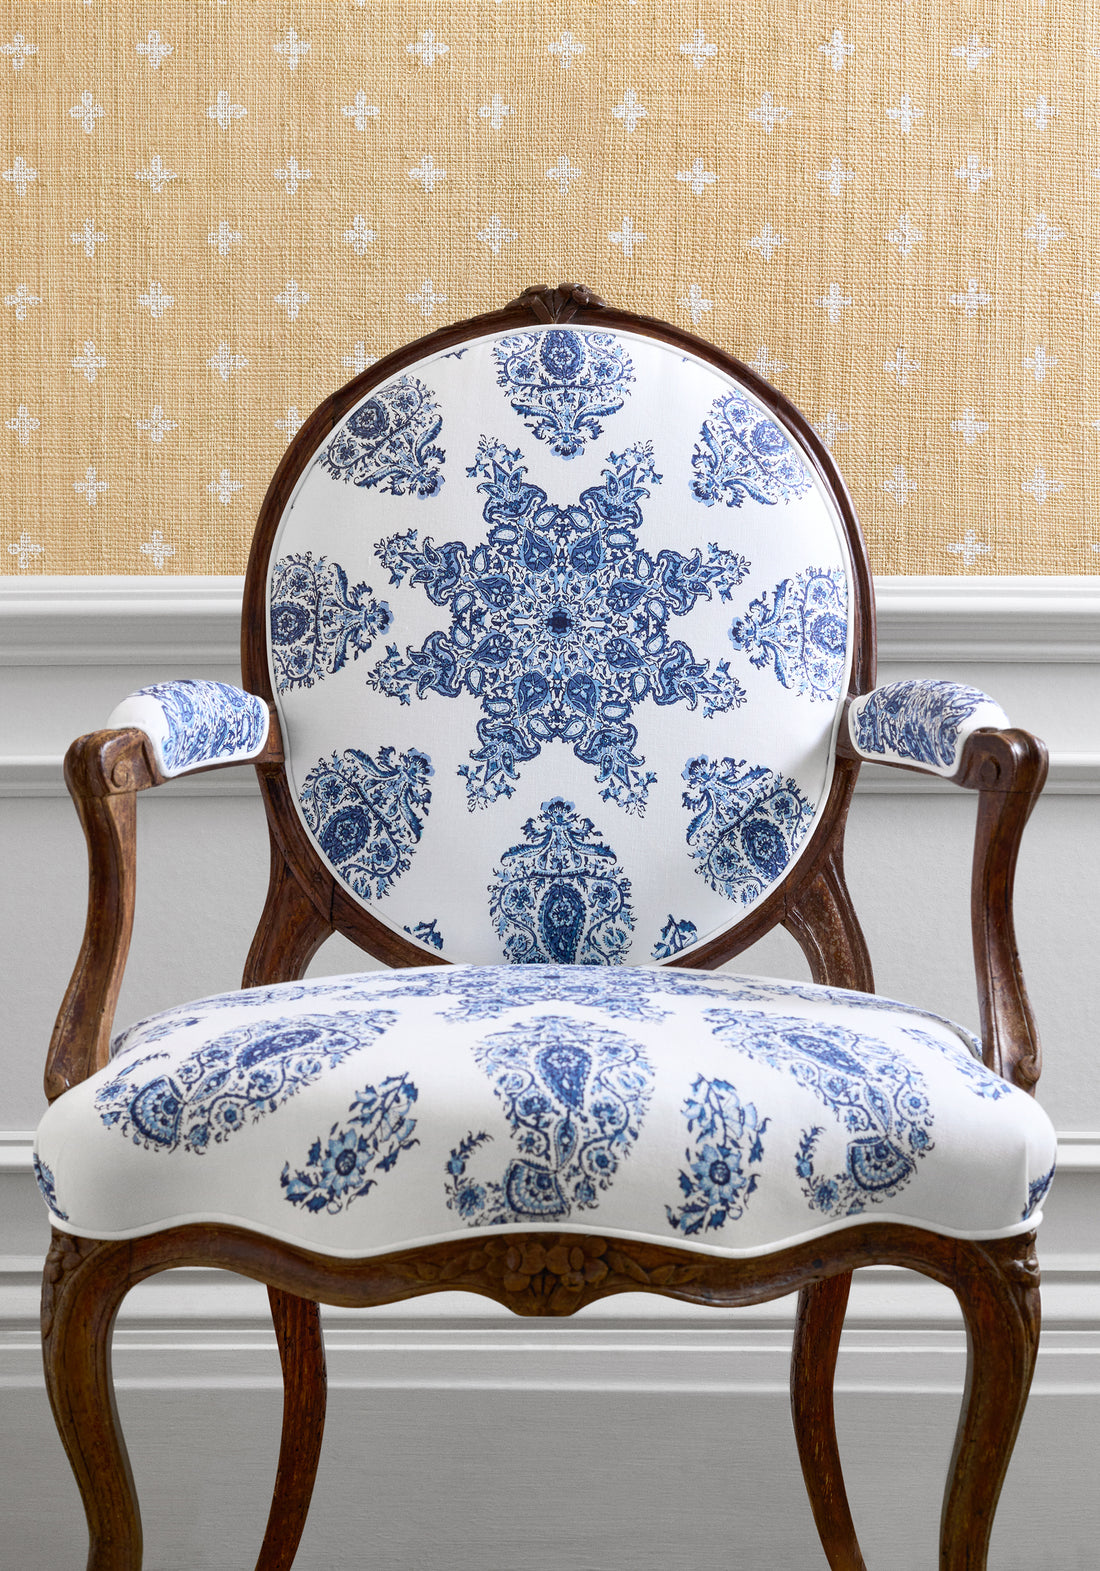 Chair upholstered with East India fabric in blue and white color - pattern number F936429 - by Thibaut in the Indienne collection